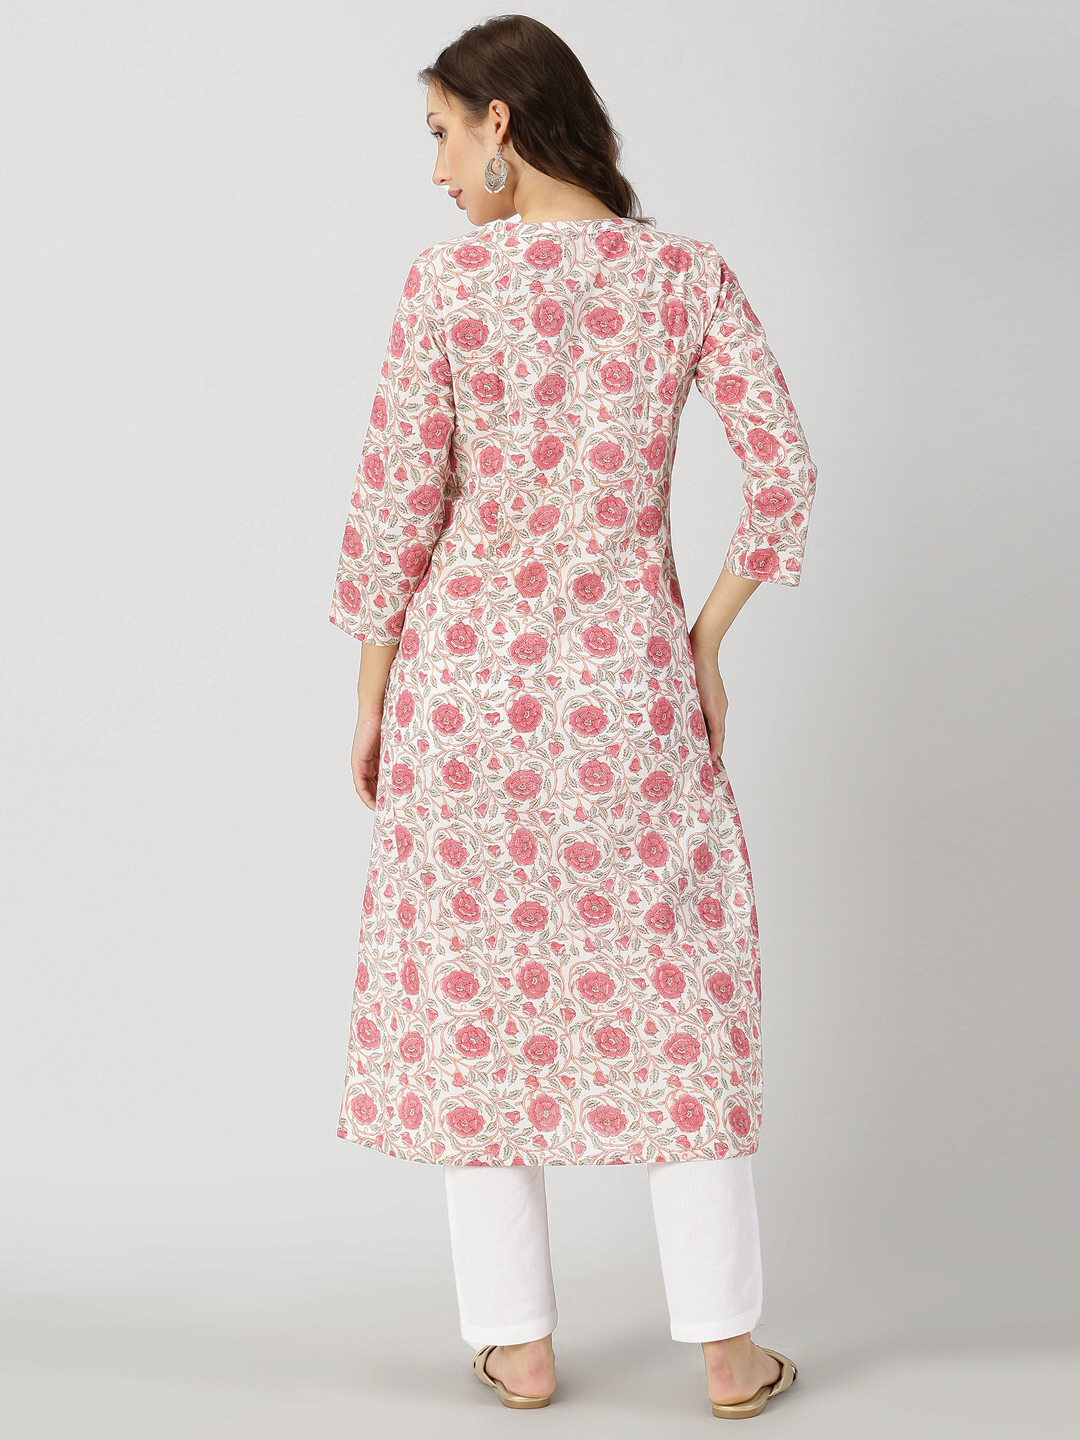 White-Pink Floral Print Kurta with Neck Embroidery